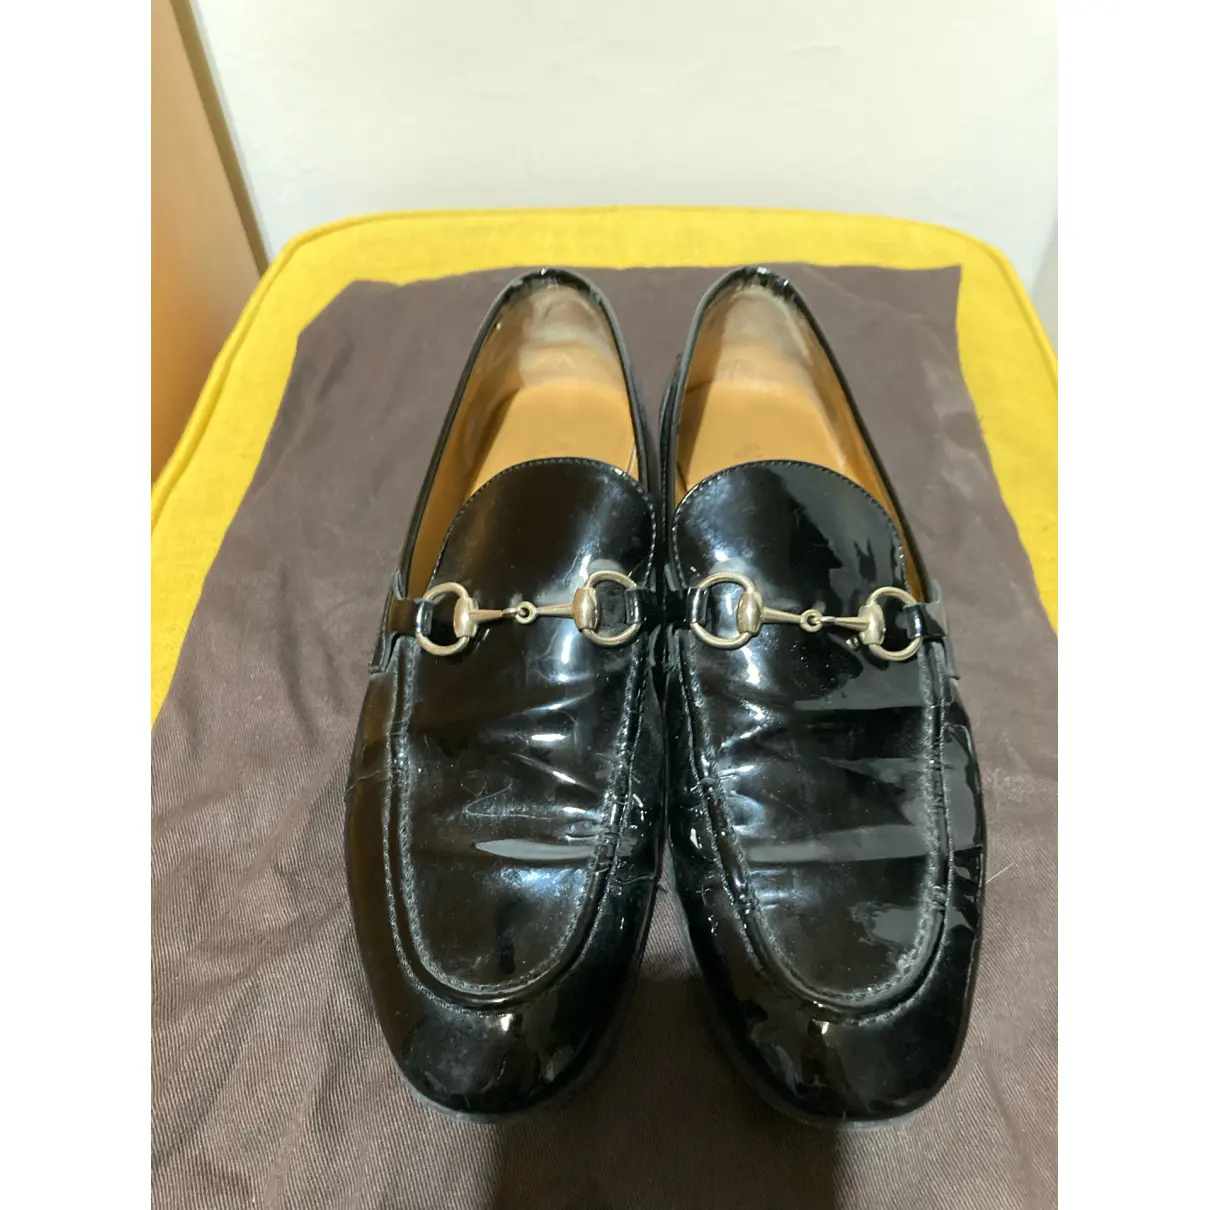 Buy Gucci Jordaan patent leather flats online